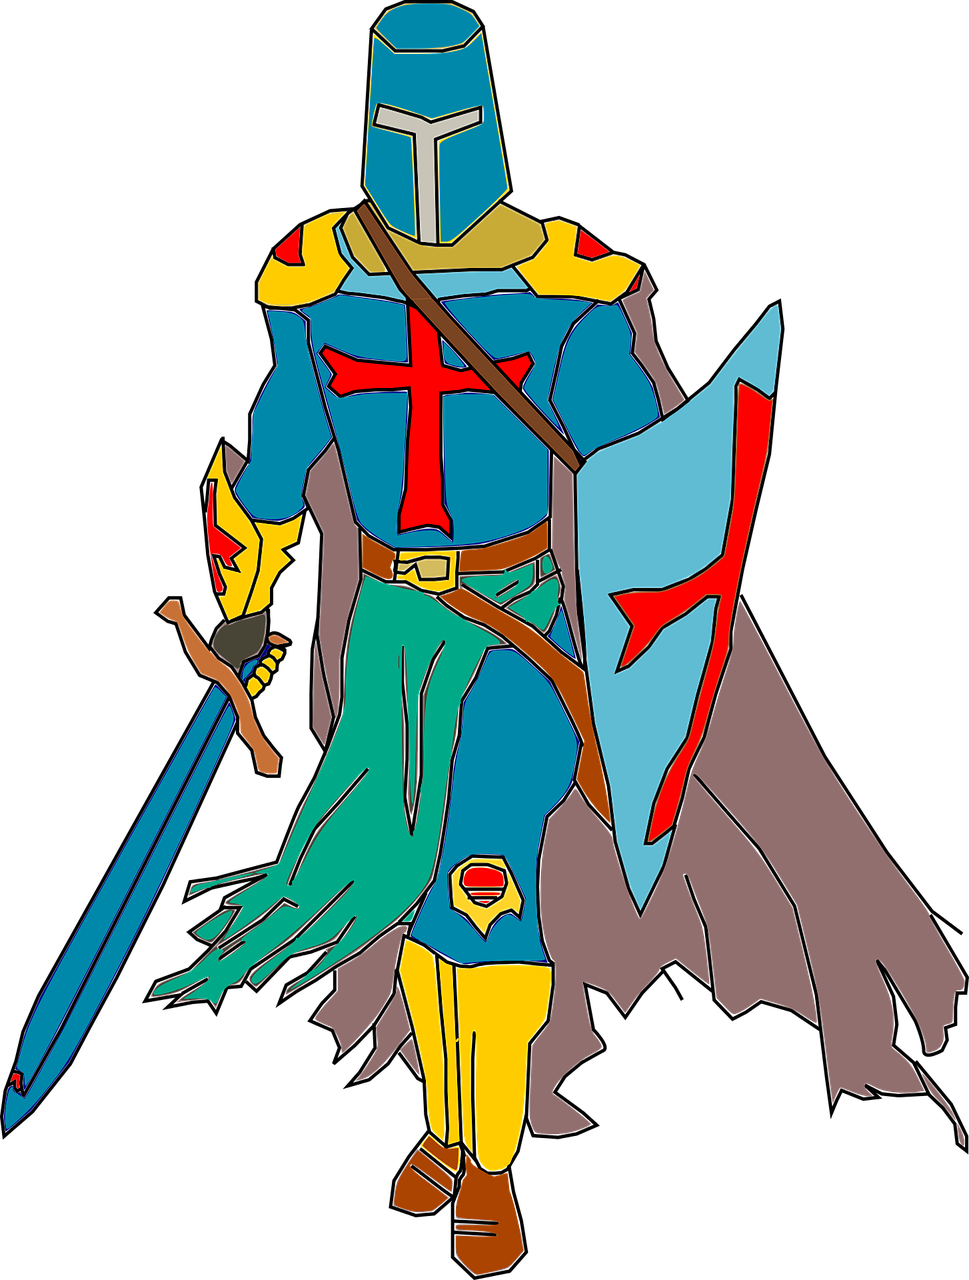 a cartoon knight with a sword and shield, inspired by Howard Pyle, sots art, filmation animation, ms paint drawing, god of death, set back dead colors